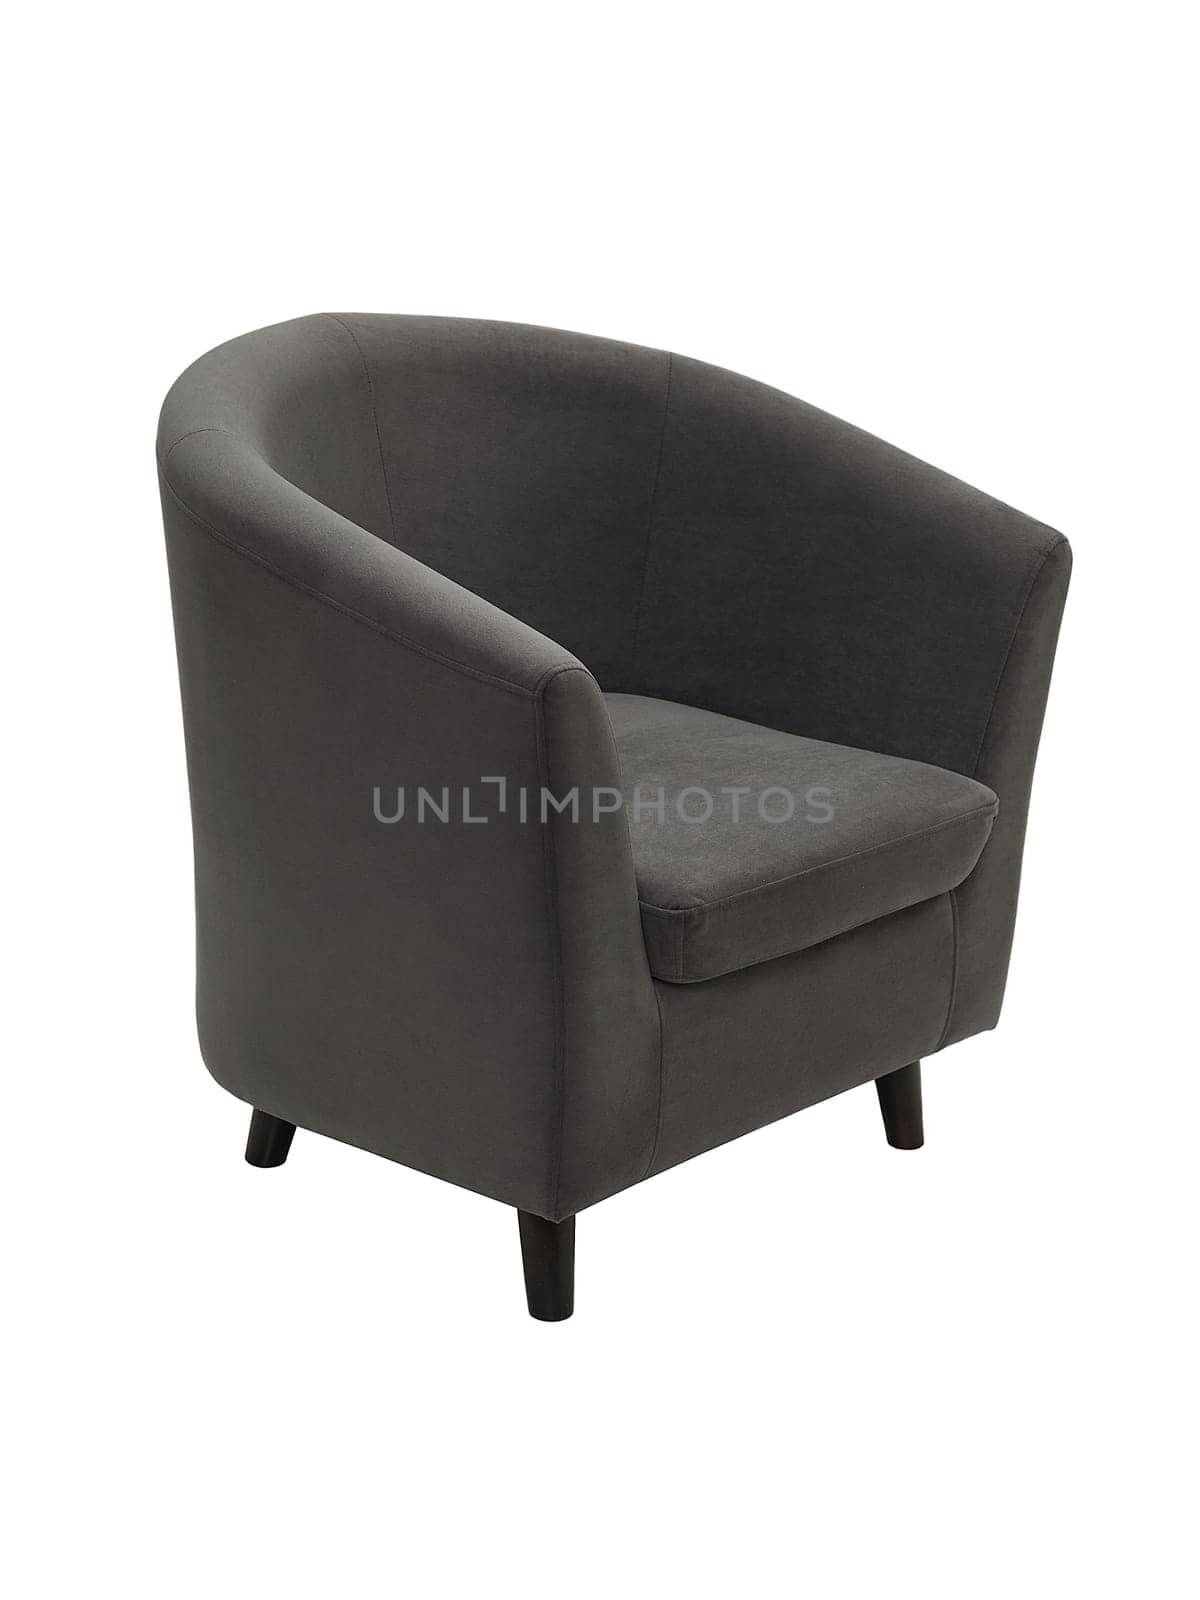 modern gray fabric armchair with wooden legs isolated on white background, side view.